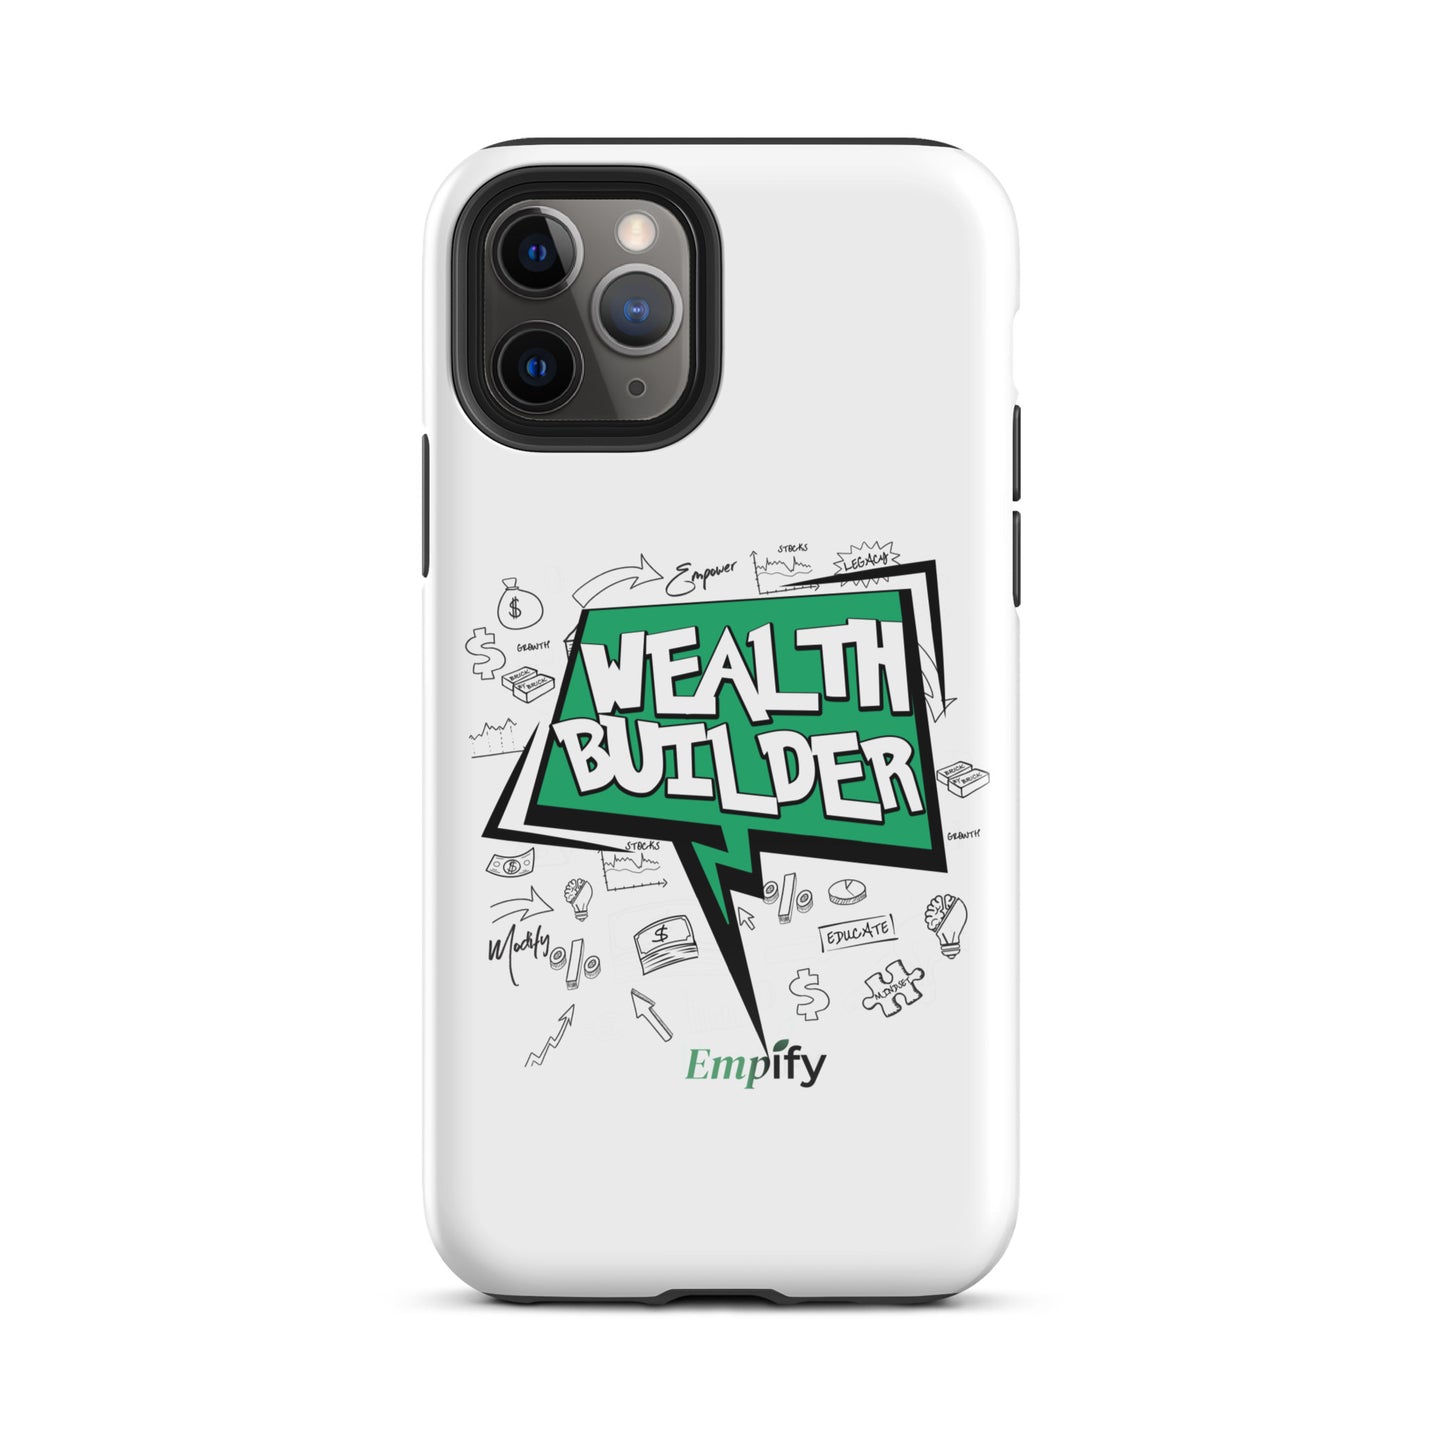 Wealth Builder Tough  Case for iPhone®